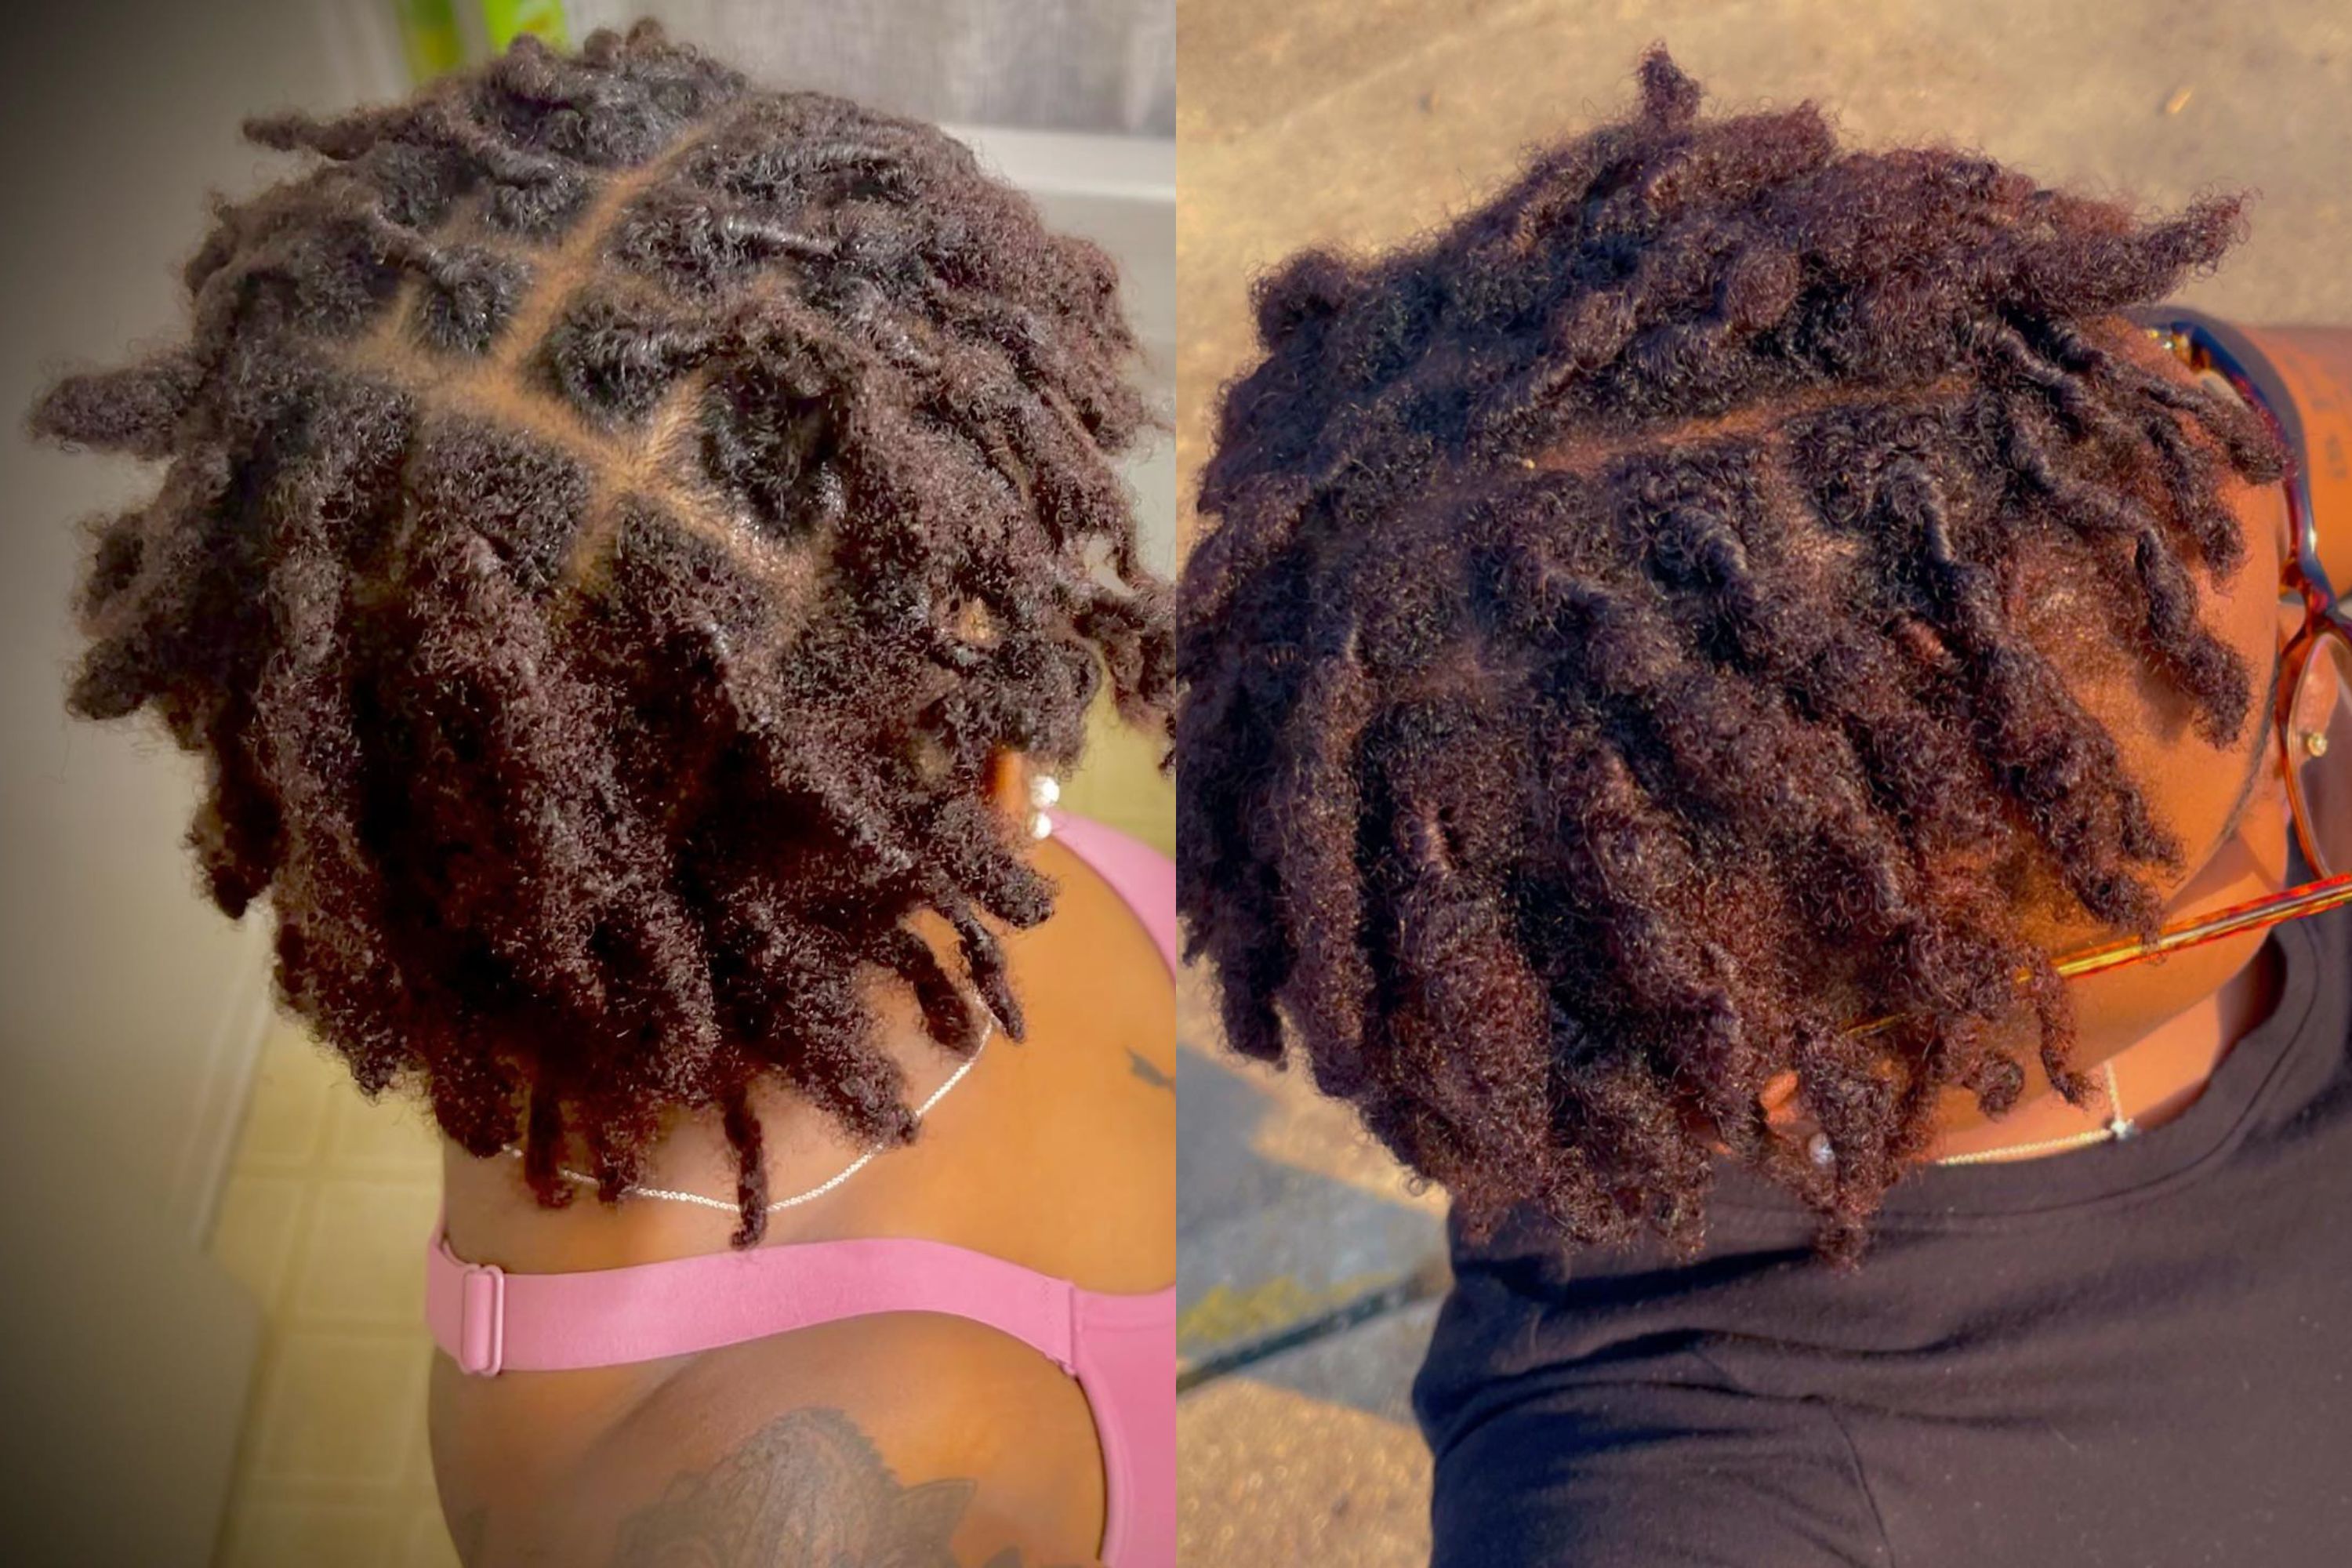 25 Easy short loc styles for females with short hair (pictures